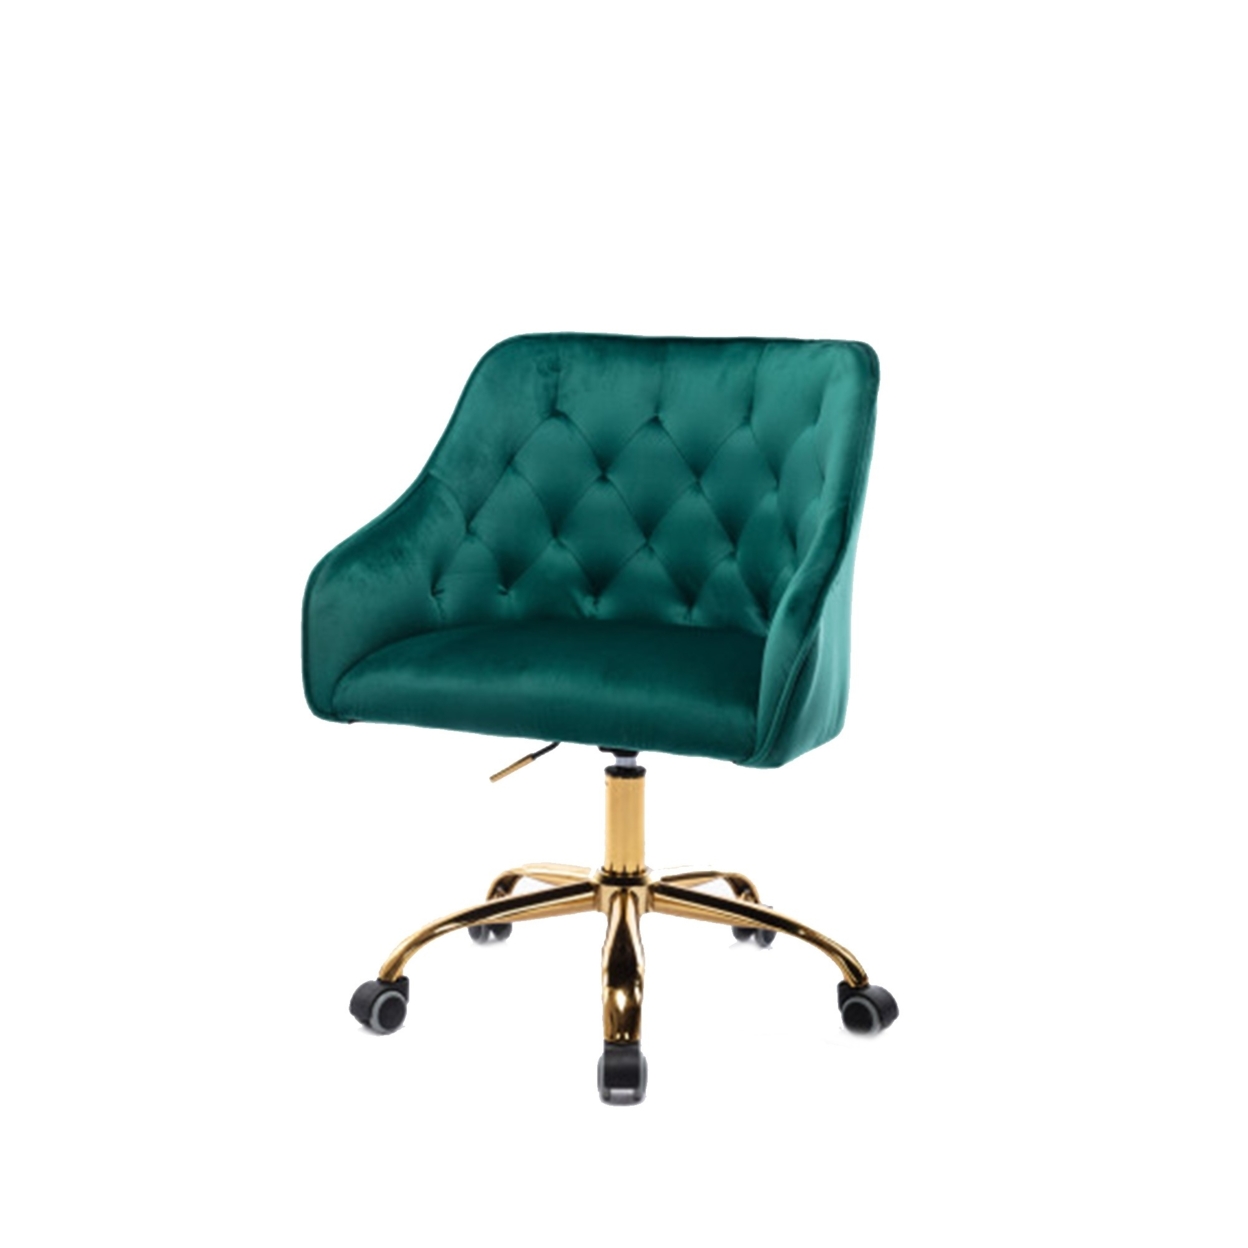 Office Chair With Padded Swivel Seat And Tufting, Green- Saltoro Sherpi